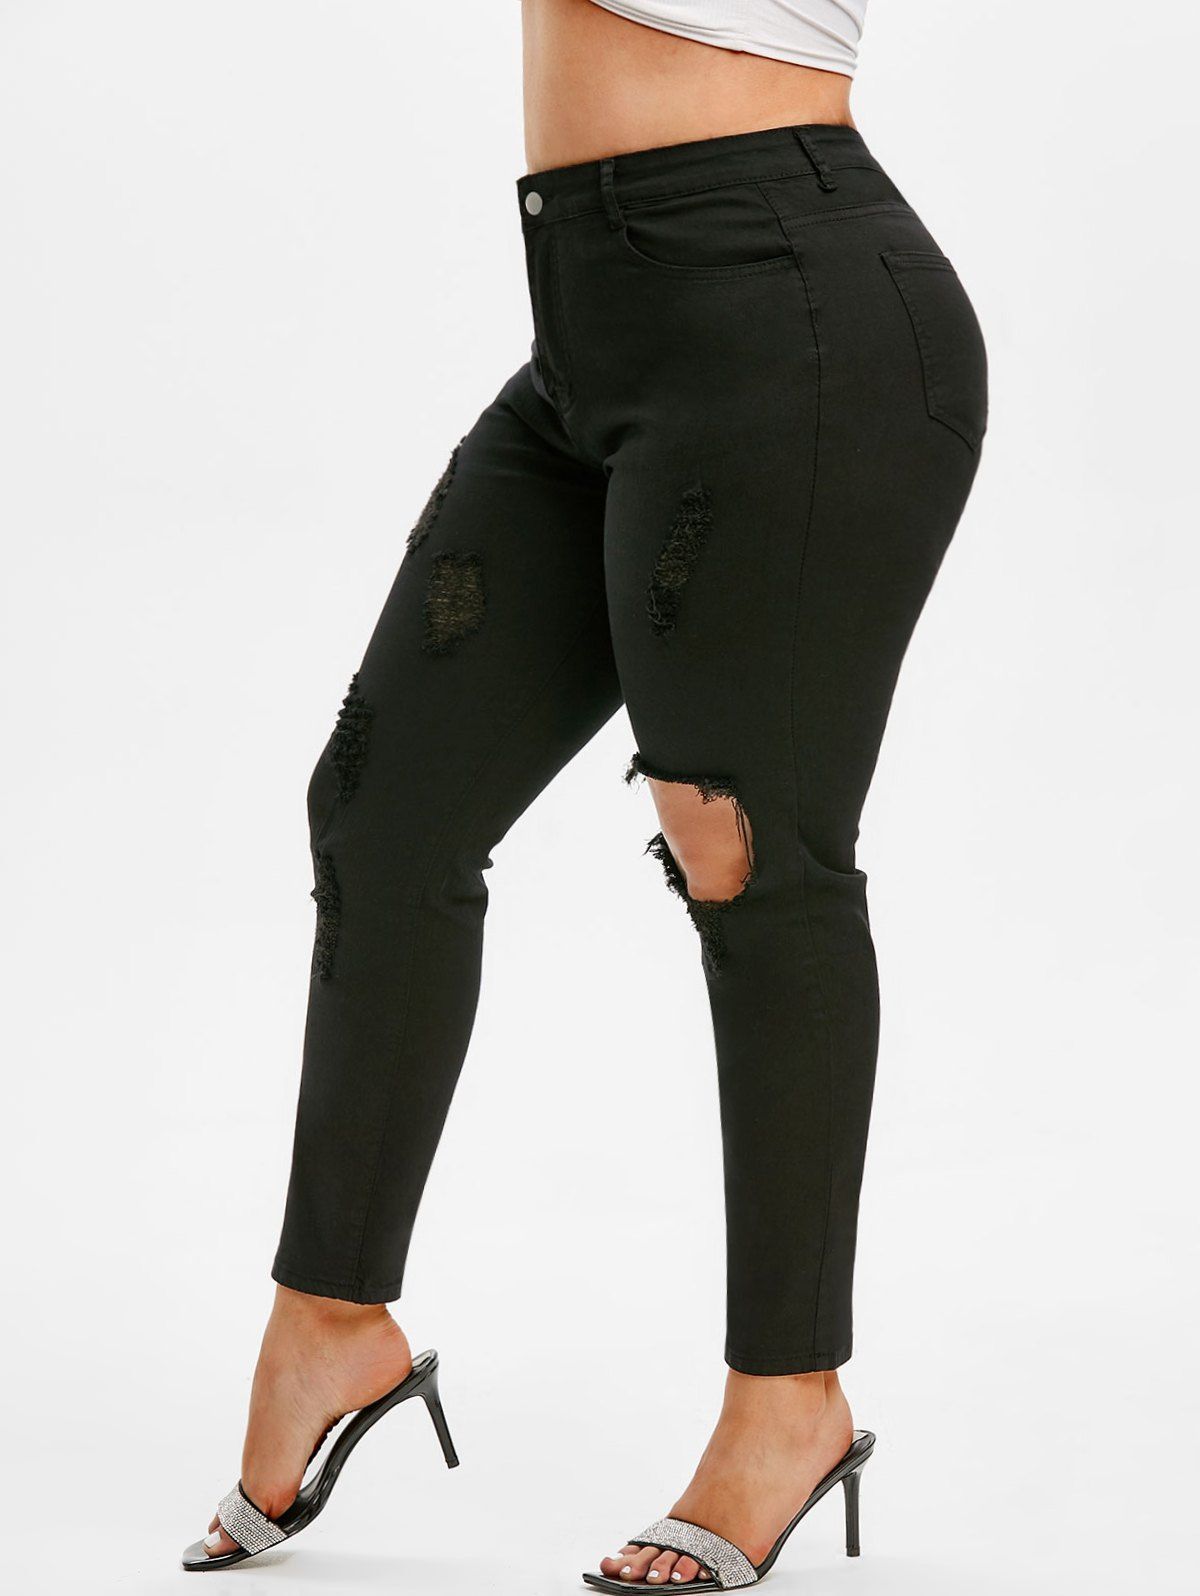 Distressed Cut Out Plus Size Skinny Jeans [46% OFF] | Rosegal